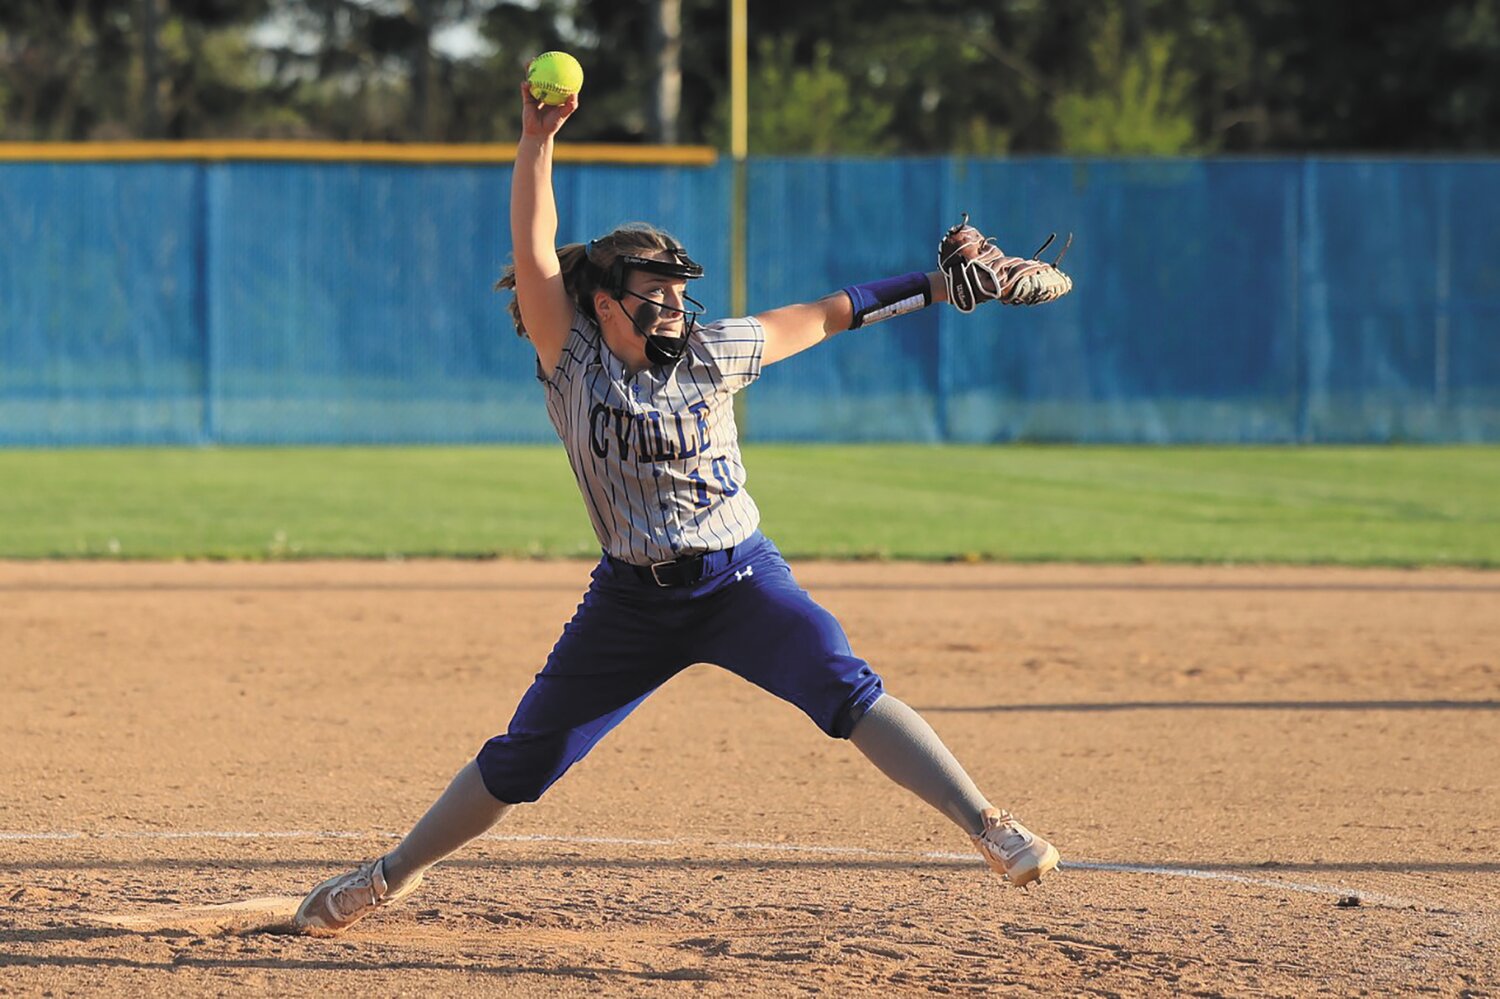 Freshman Molly Pierce gave Crawfordsville softball a big boost pitching the final three innings and allowing just one Southmont run.